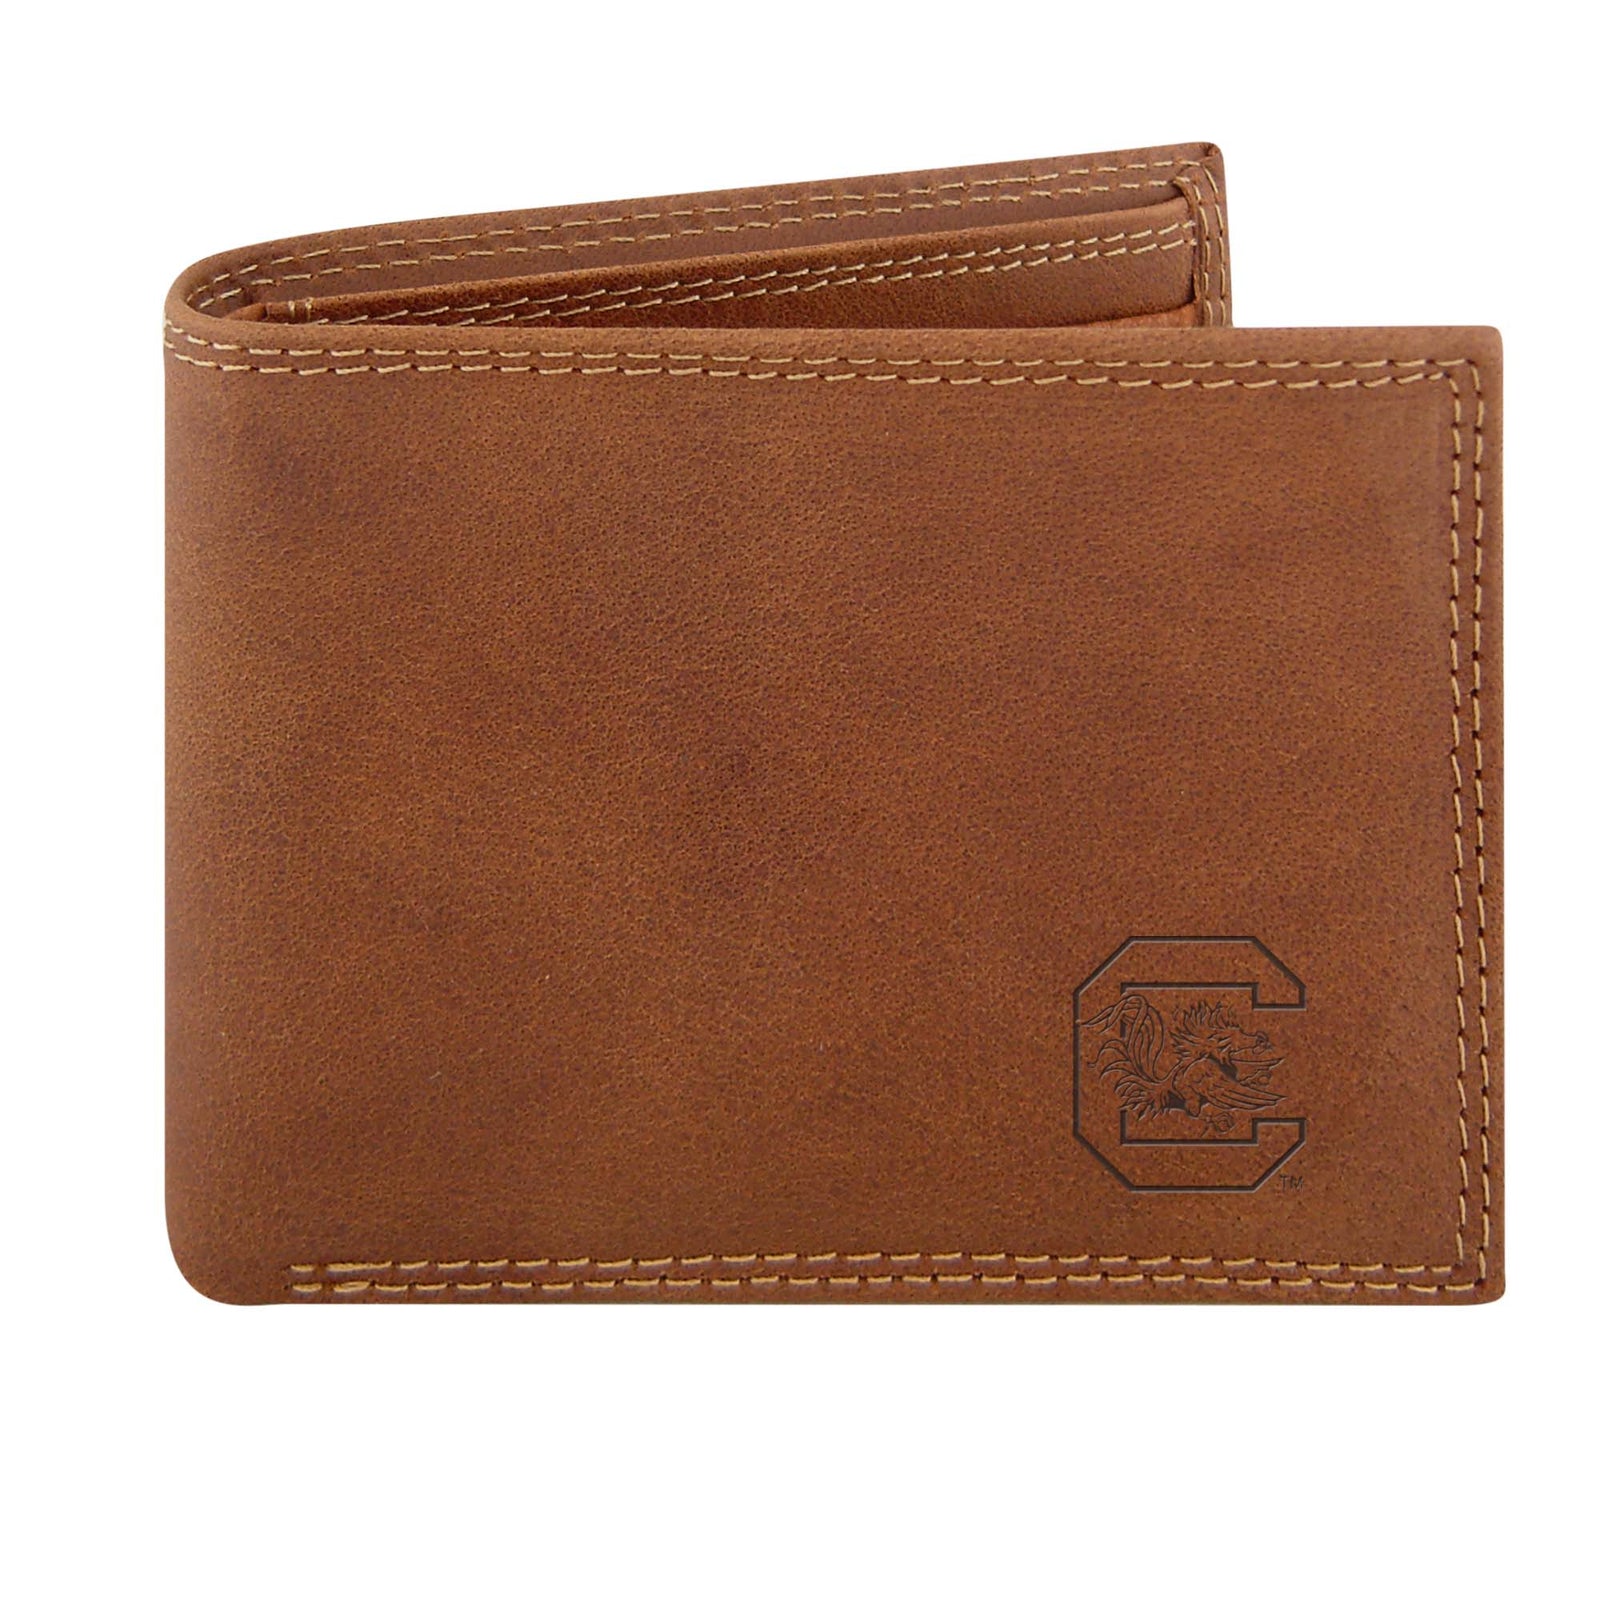 Palmetto Moon Embossed Leather Trifold